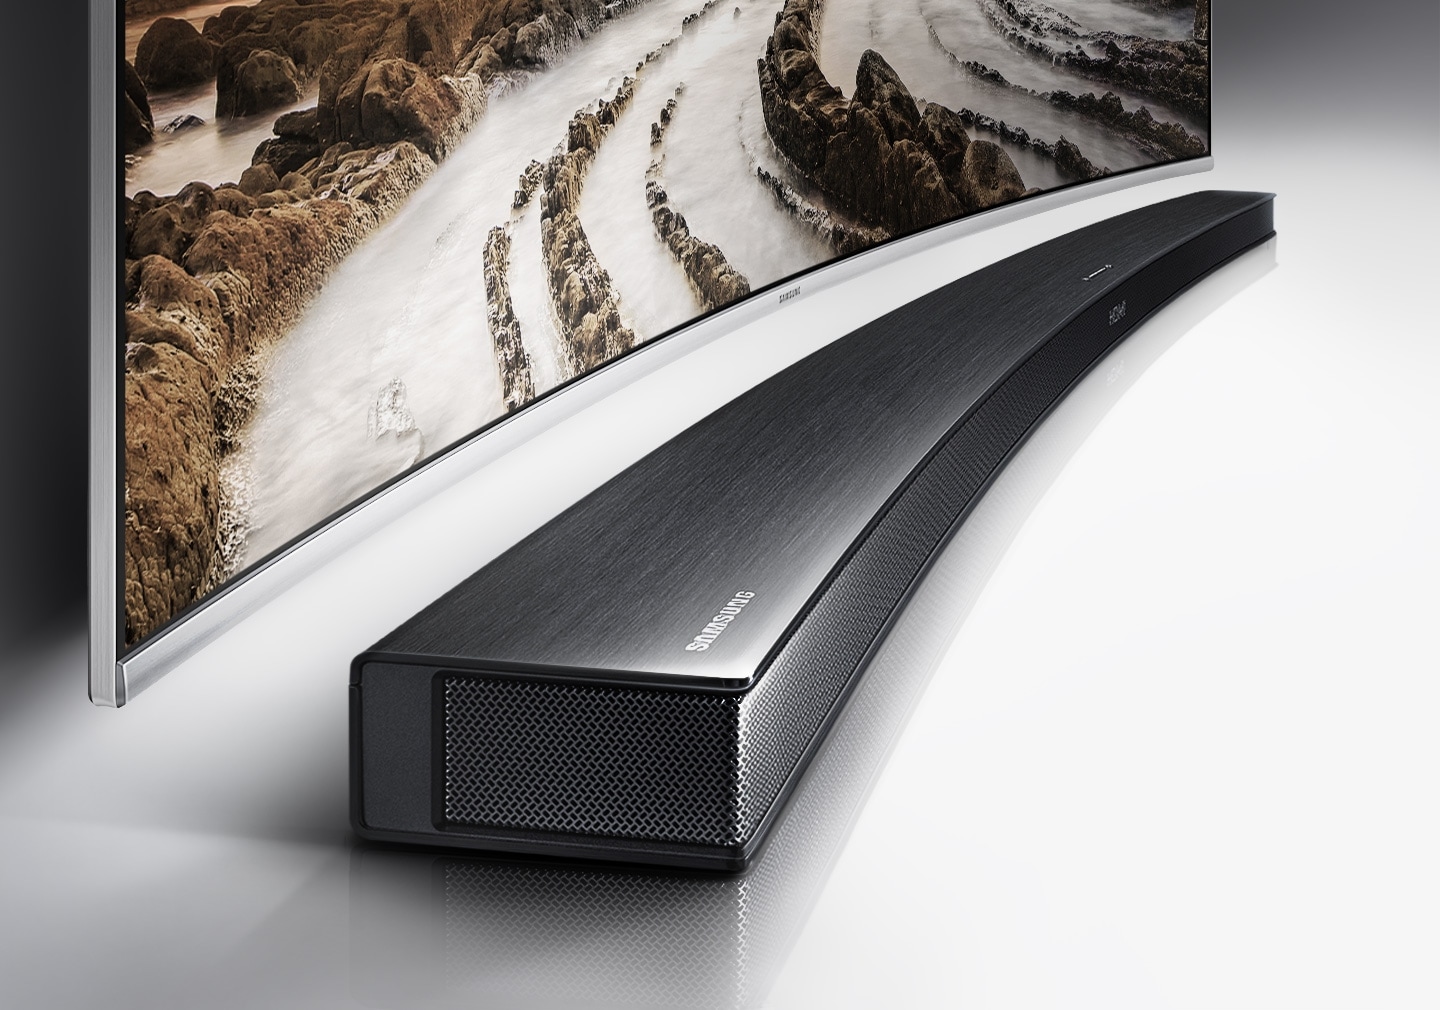 Designed for your curved TV